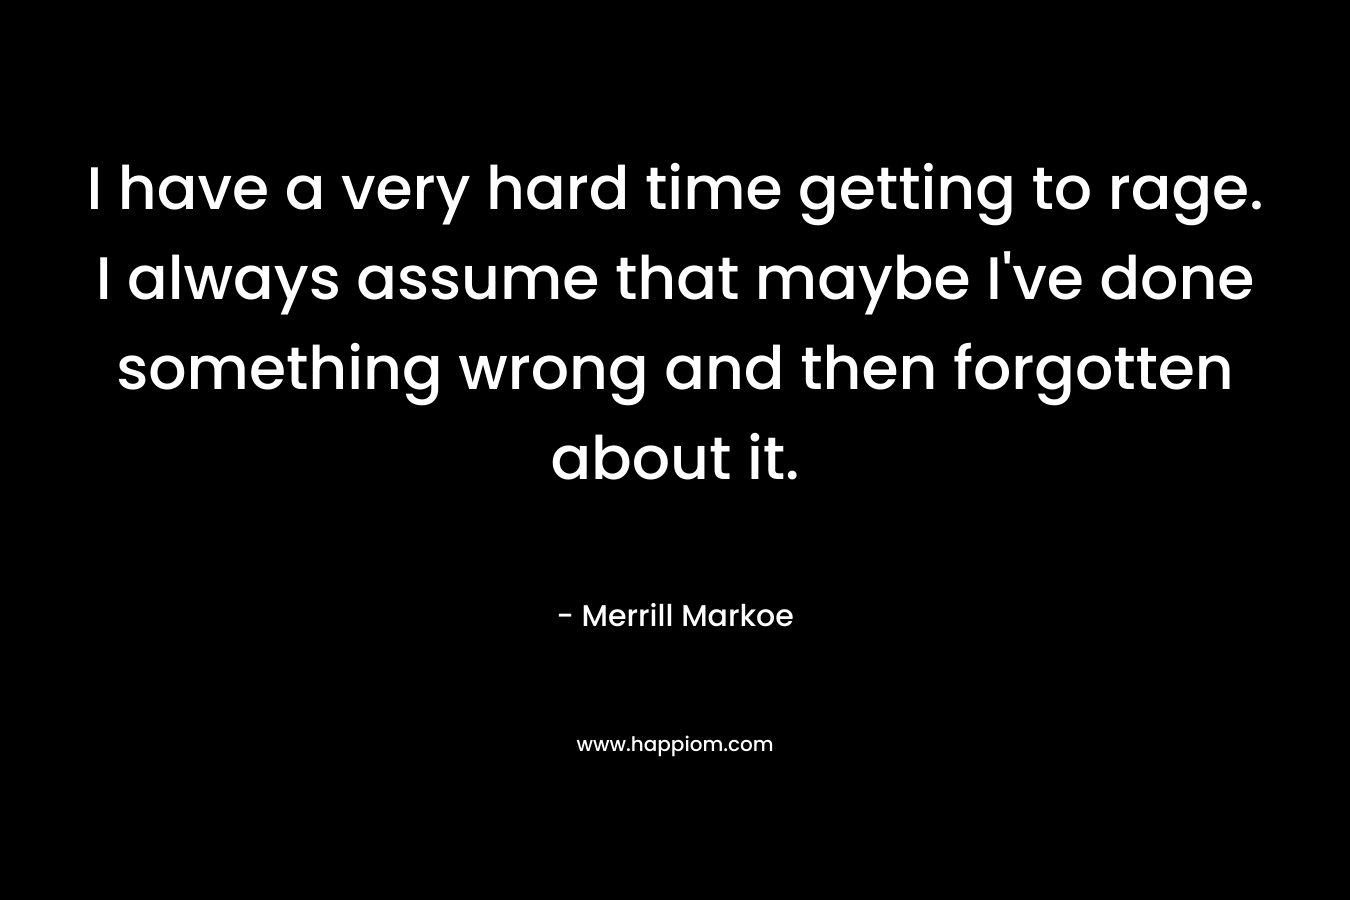 I have a very hard time getting to rage. I always assume that maybe I’ve done something wrong and then forgotten about it. – Merrill Markoe